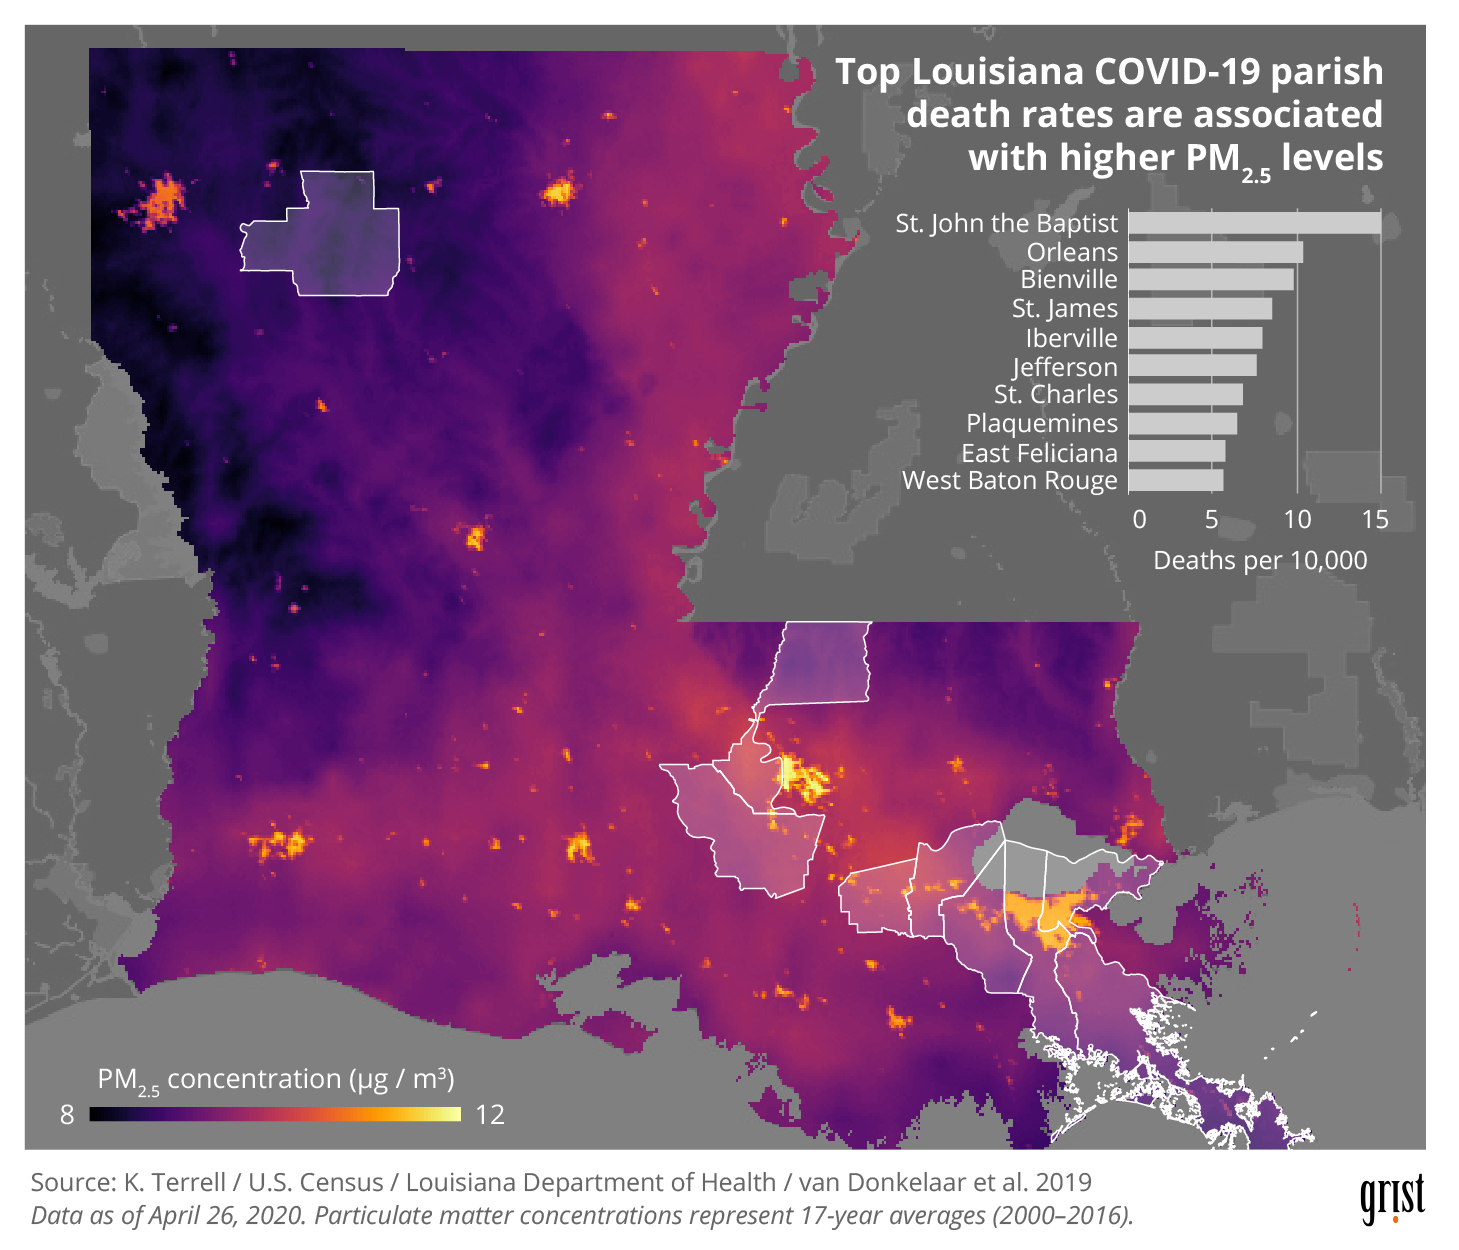 A map showing PM2.5 concentrations in Louisiana (averaged over 2000–2016). An inset bar chart shows the top 10 COVID-19 death rates by parish. Most of the top 10 parishes are in areas with higher PM2.5 levels.